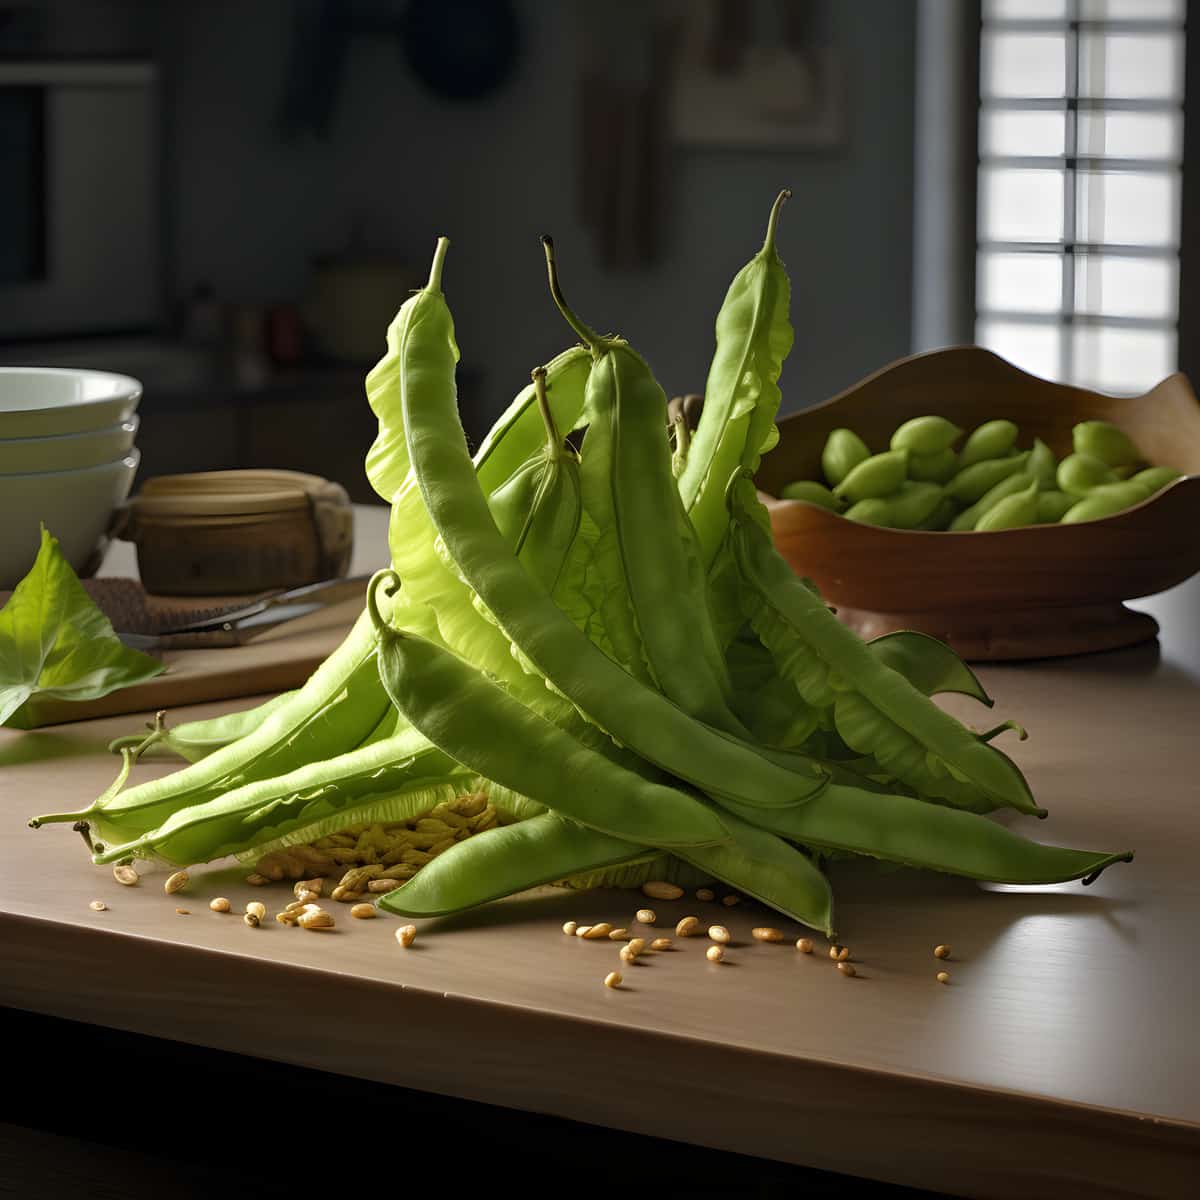 Winged Beans on a kitchen counter